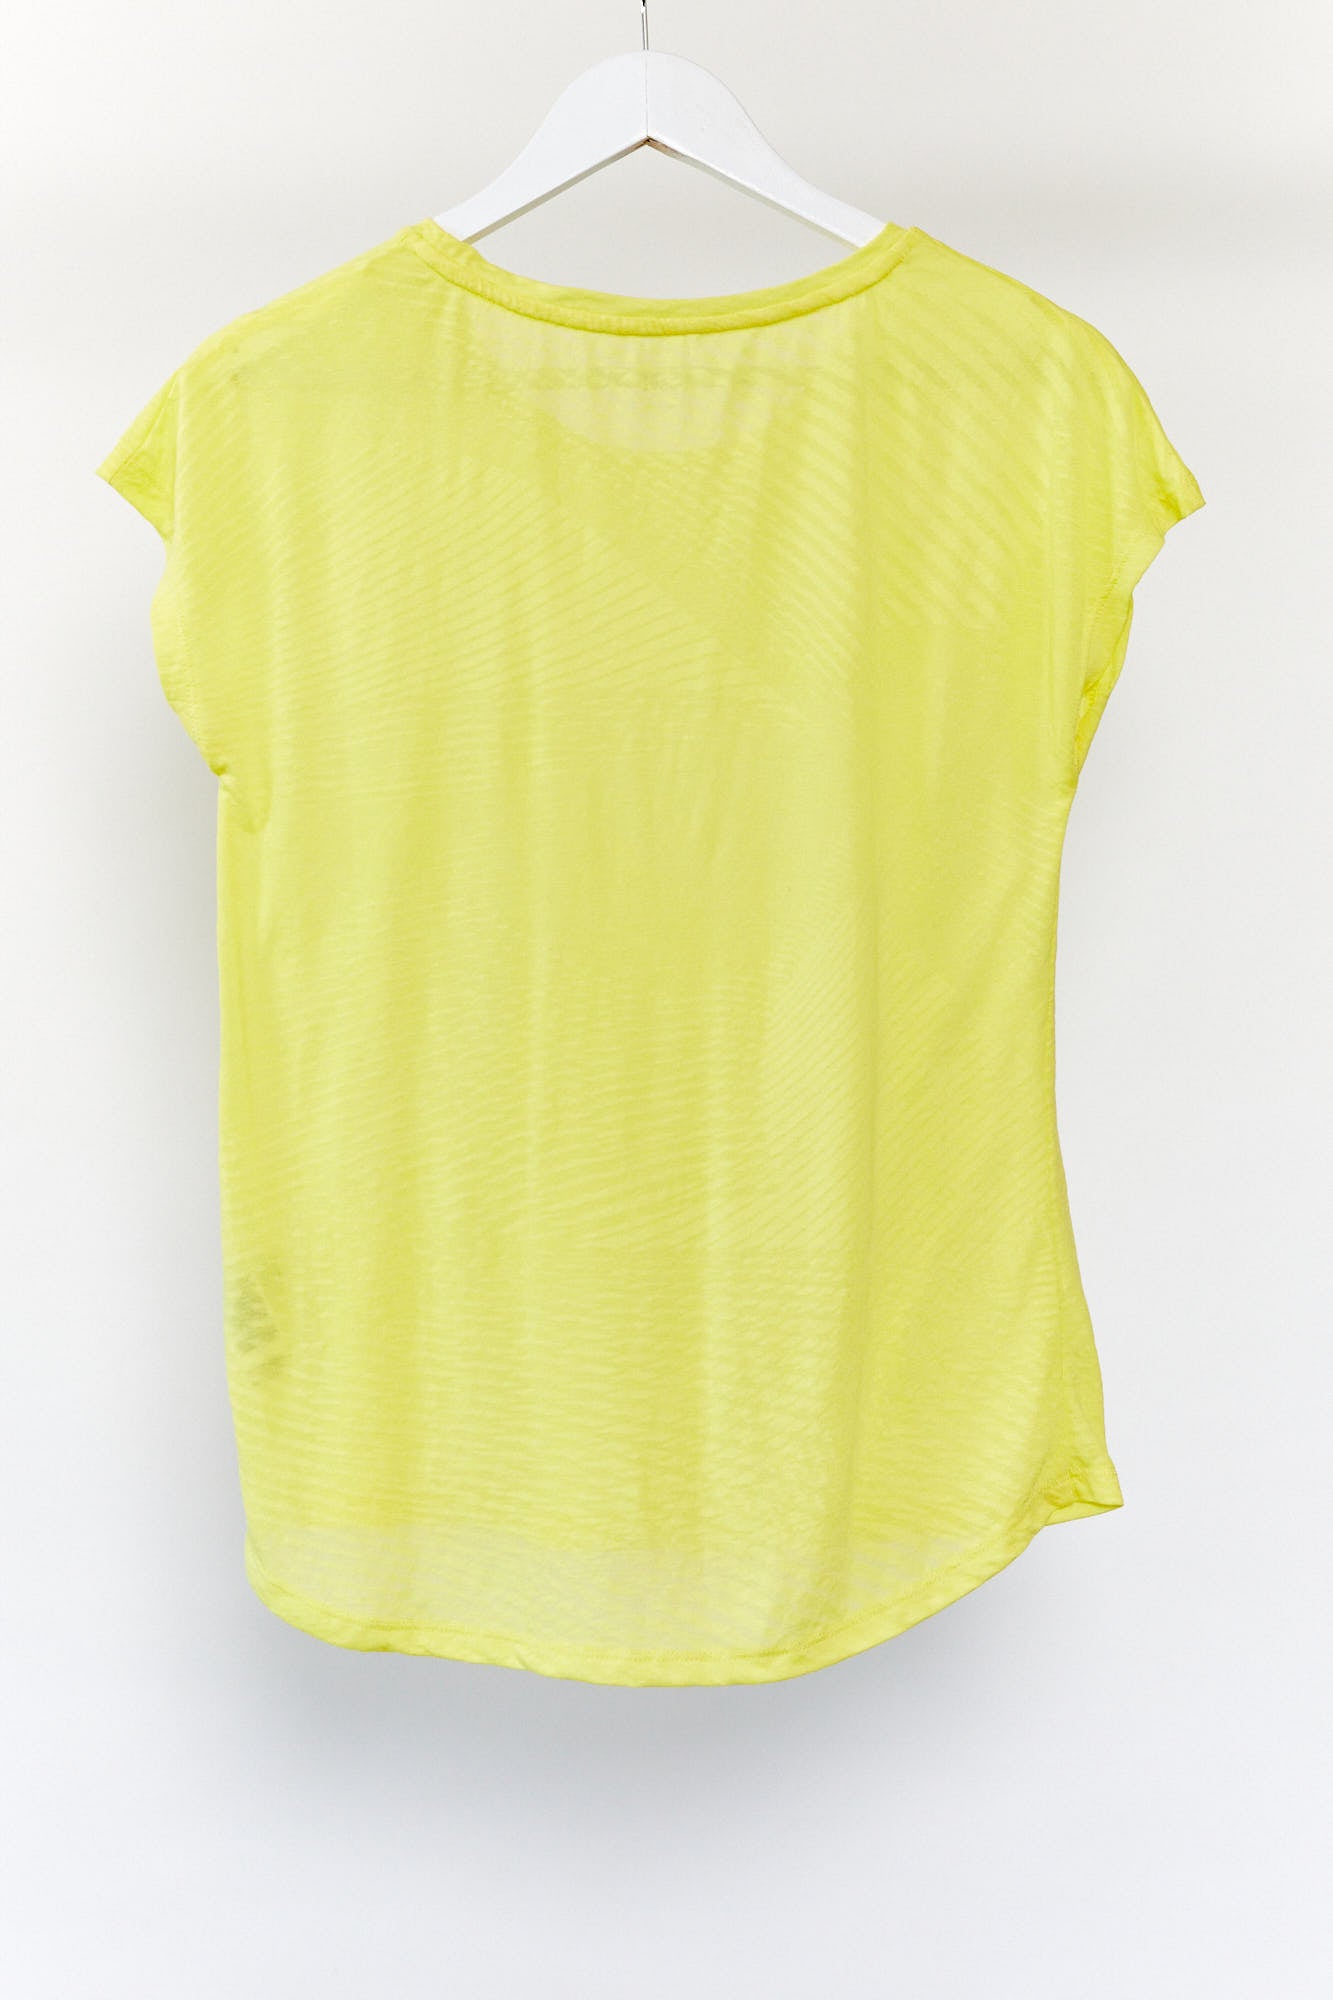 Yellow M&S Sport top Size 8